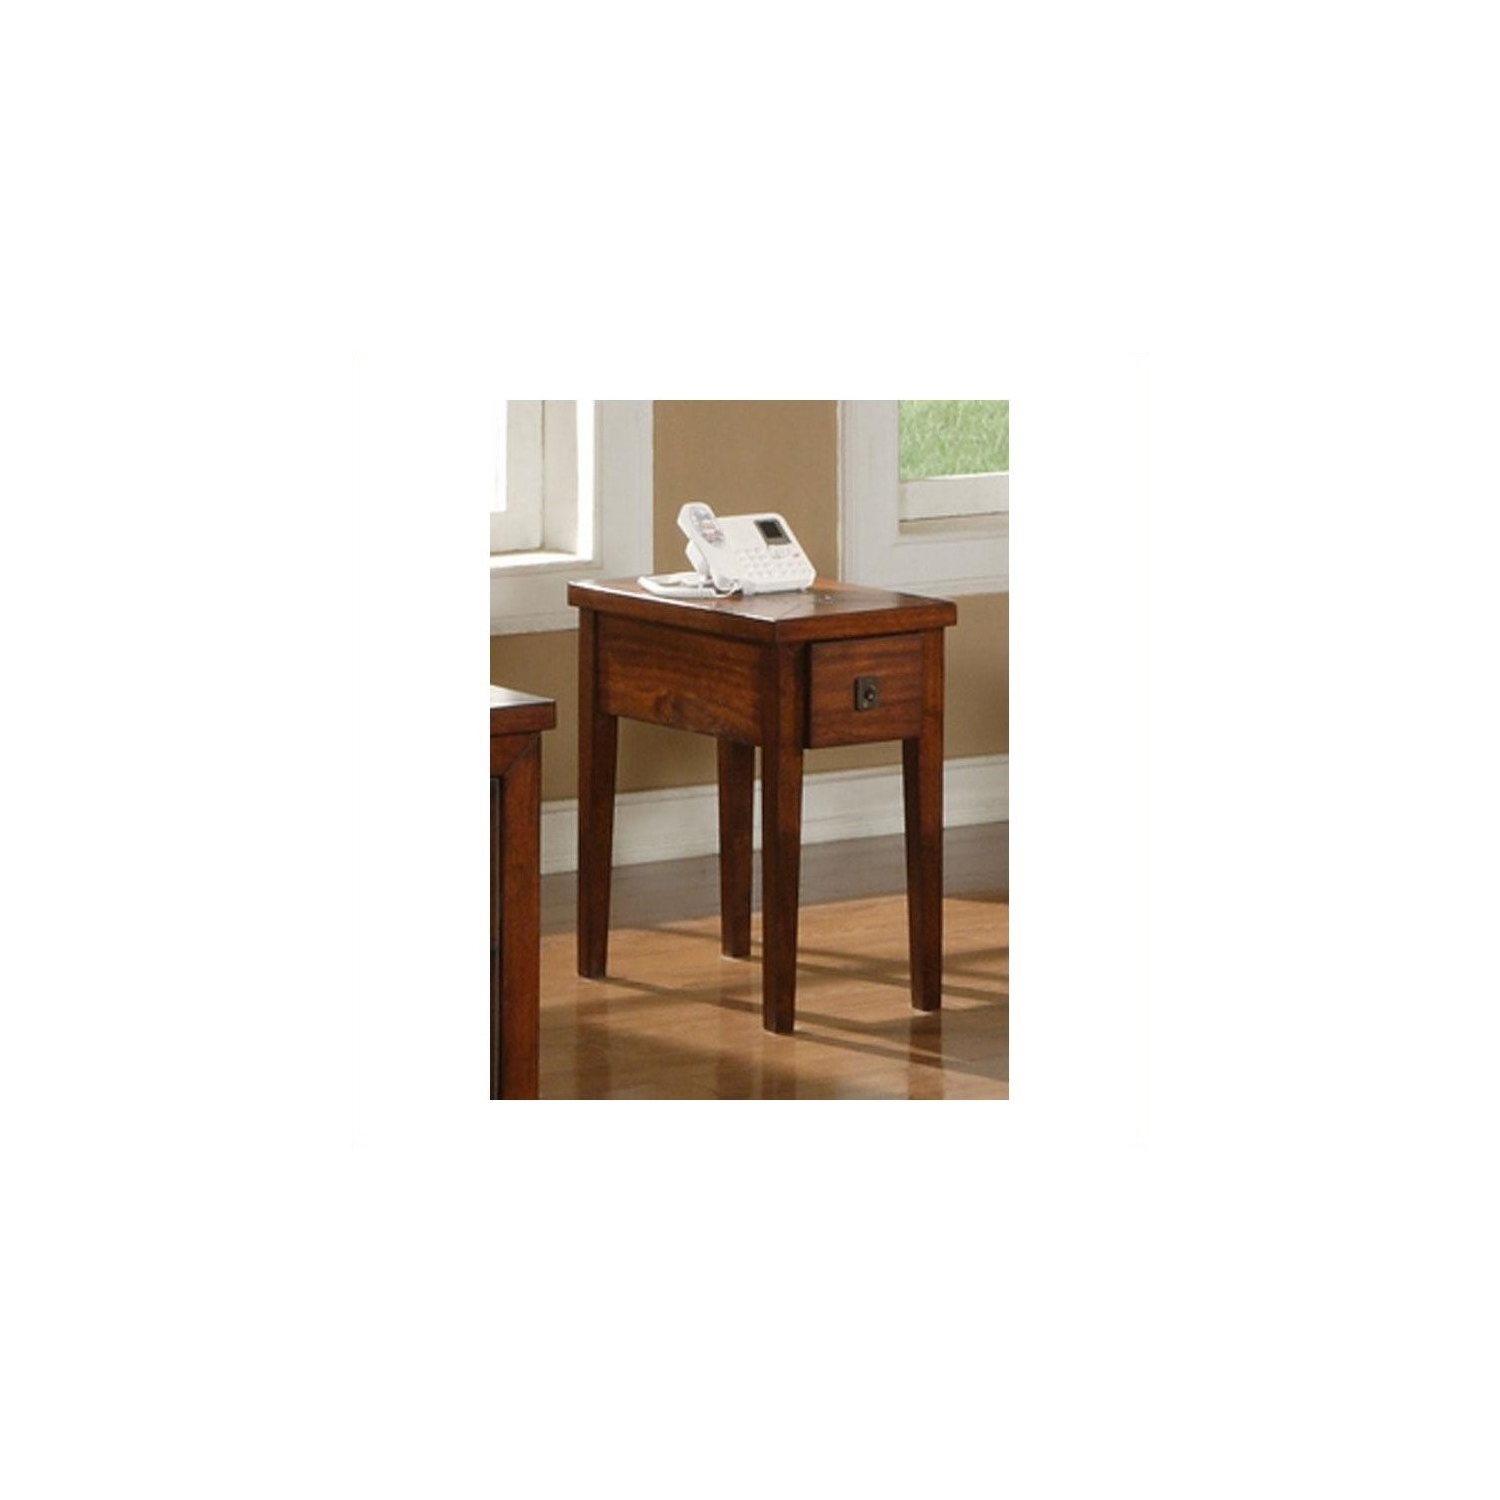 Davenport Chairside End Table in brown cherry finish with slate inlay